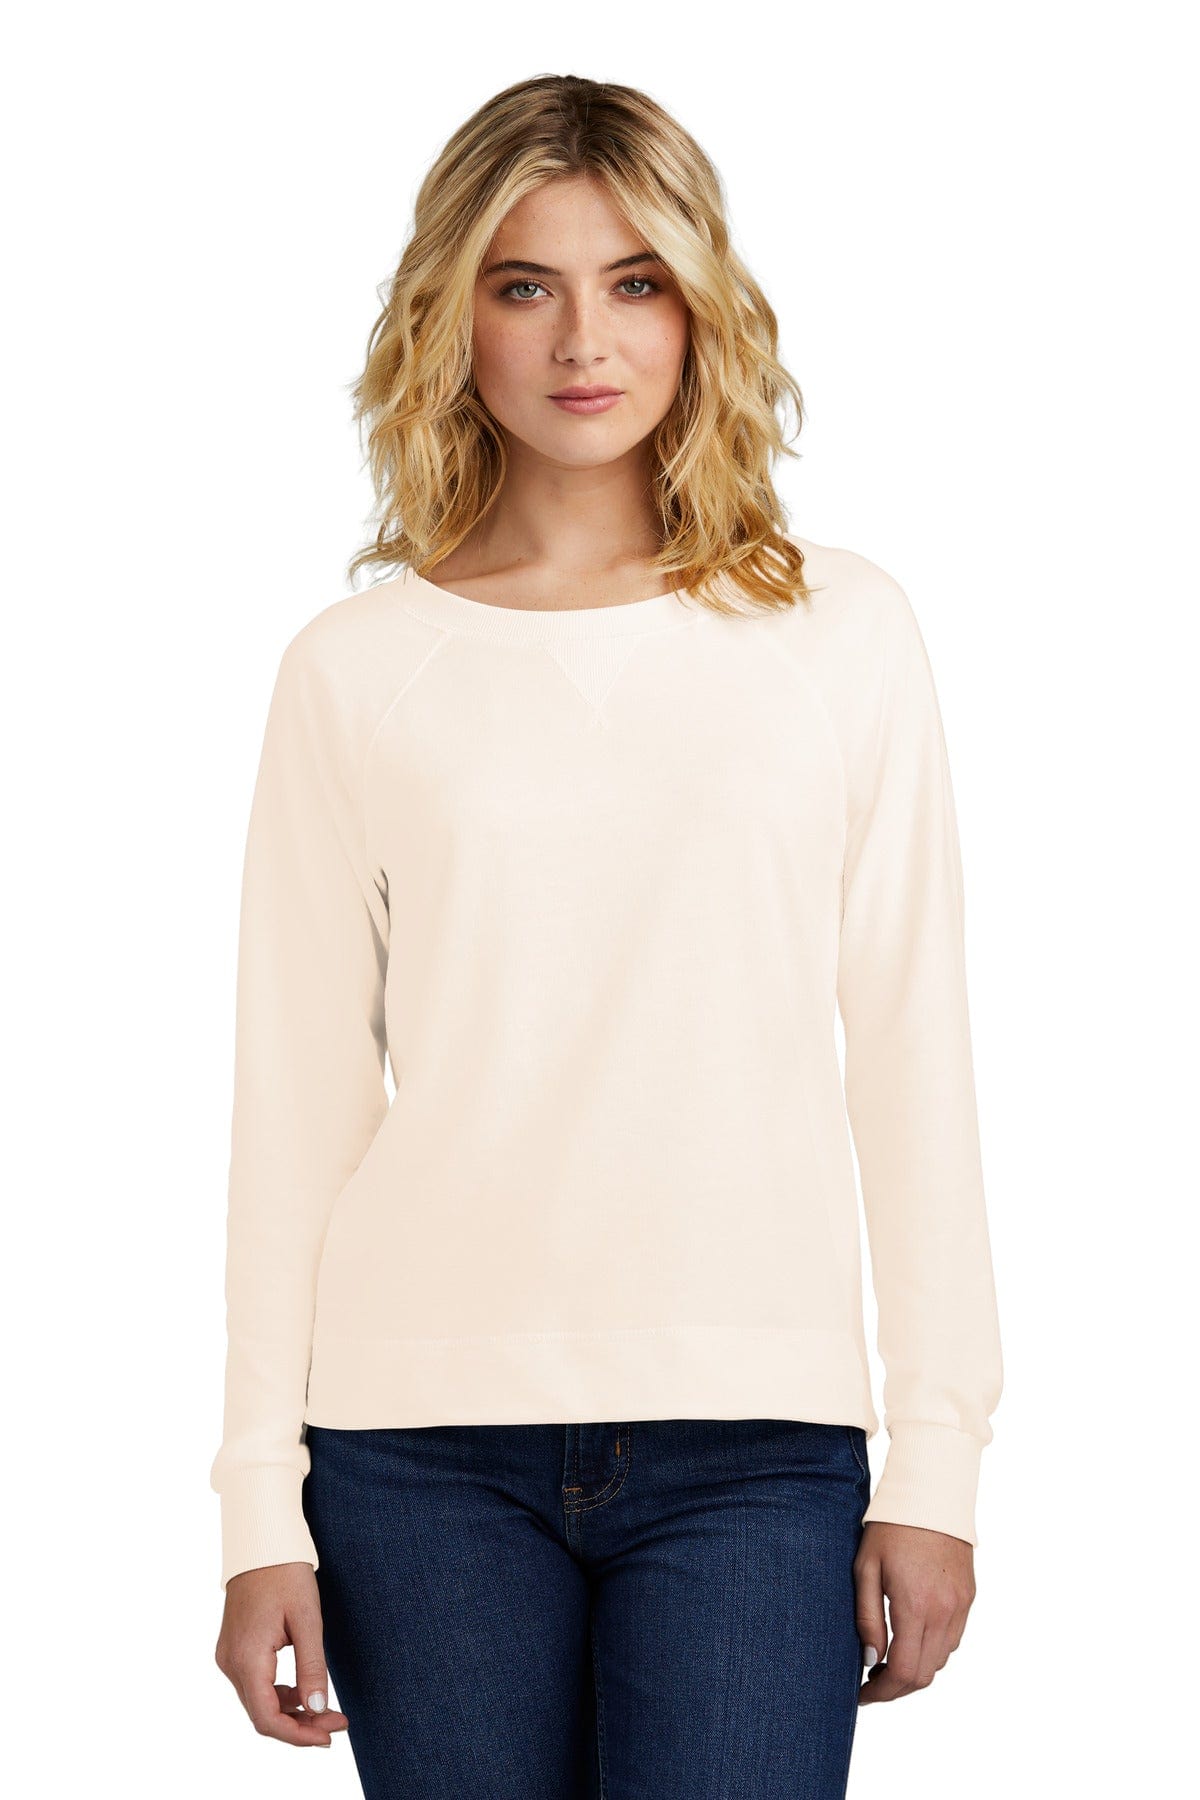 District DT672: Women's Featherweight French Terry Long Sleeve Crewneck